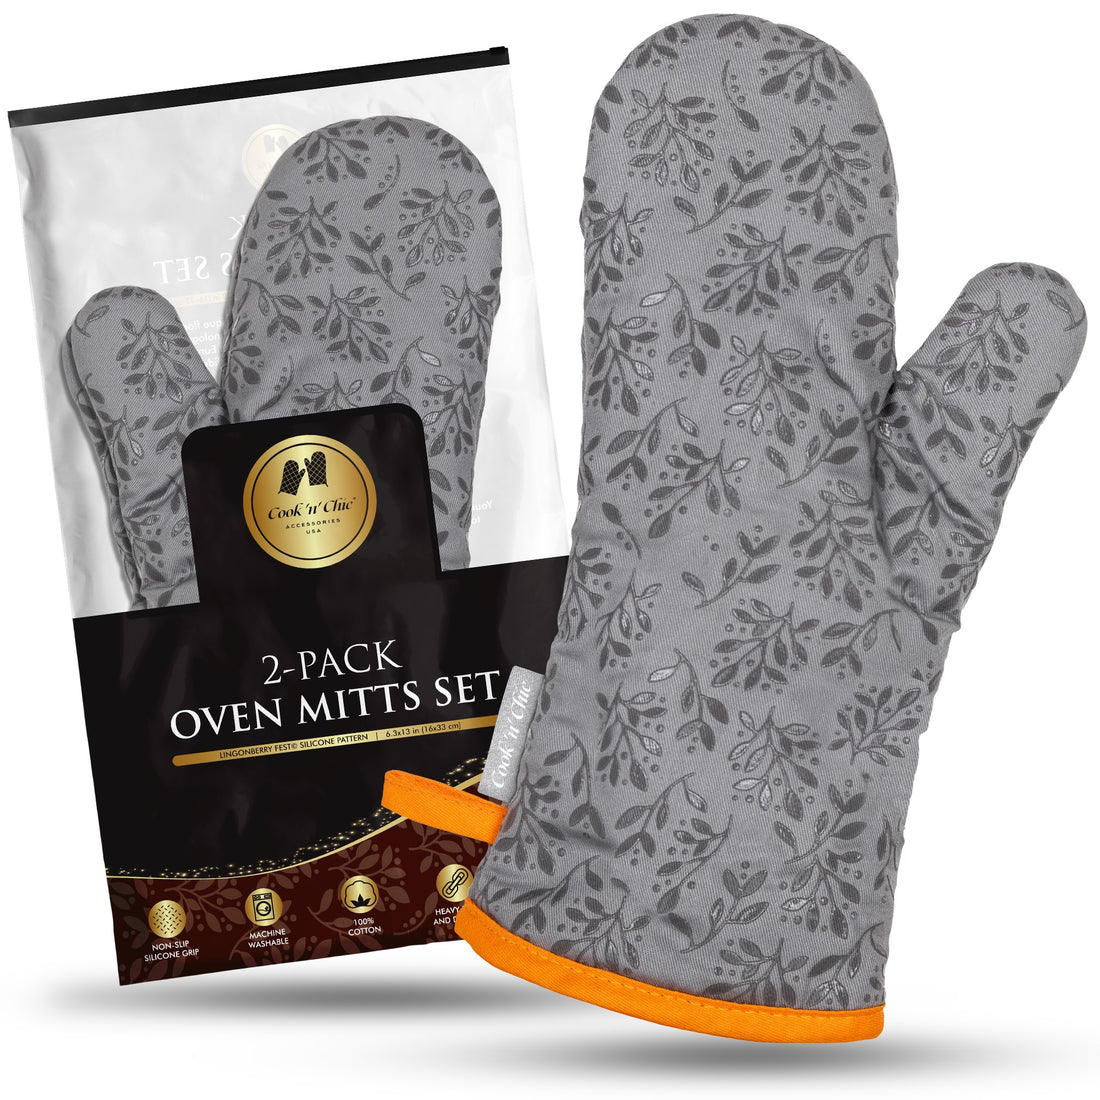 2 Silicone Heat Resistant Oven Gloves Non Slip Safe Grip Cooking